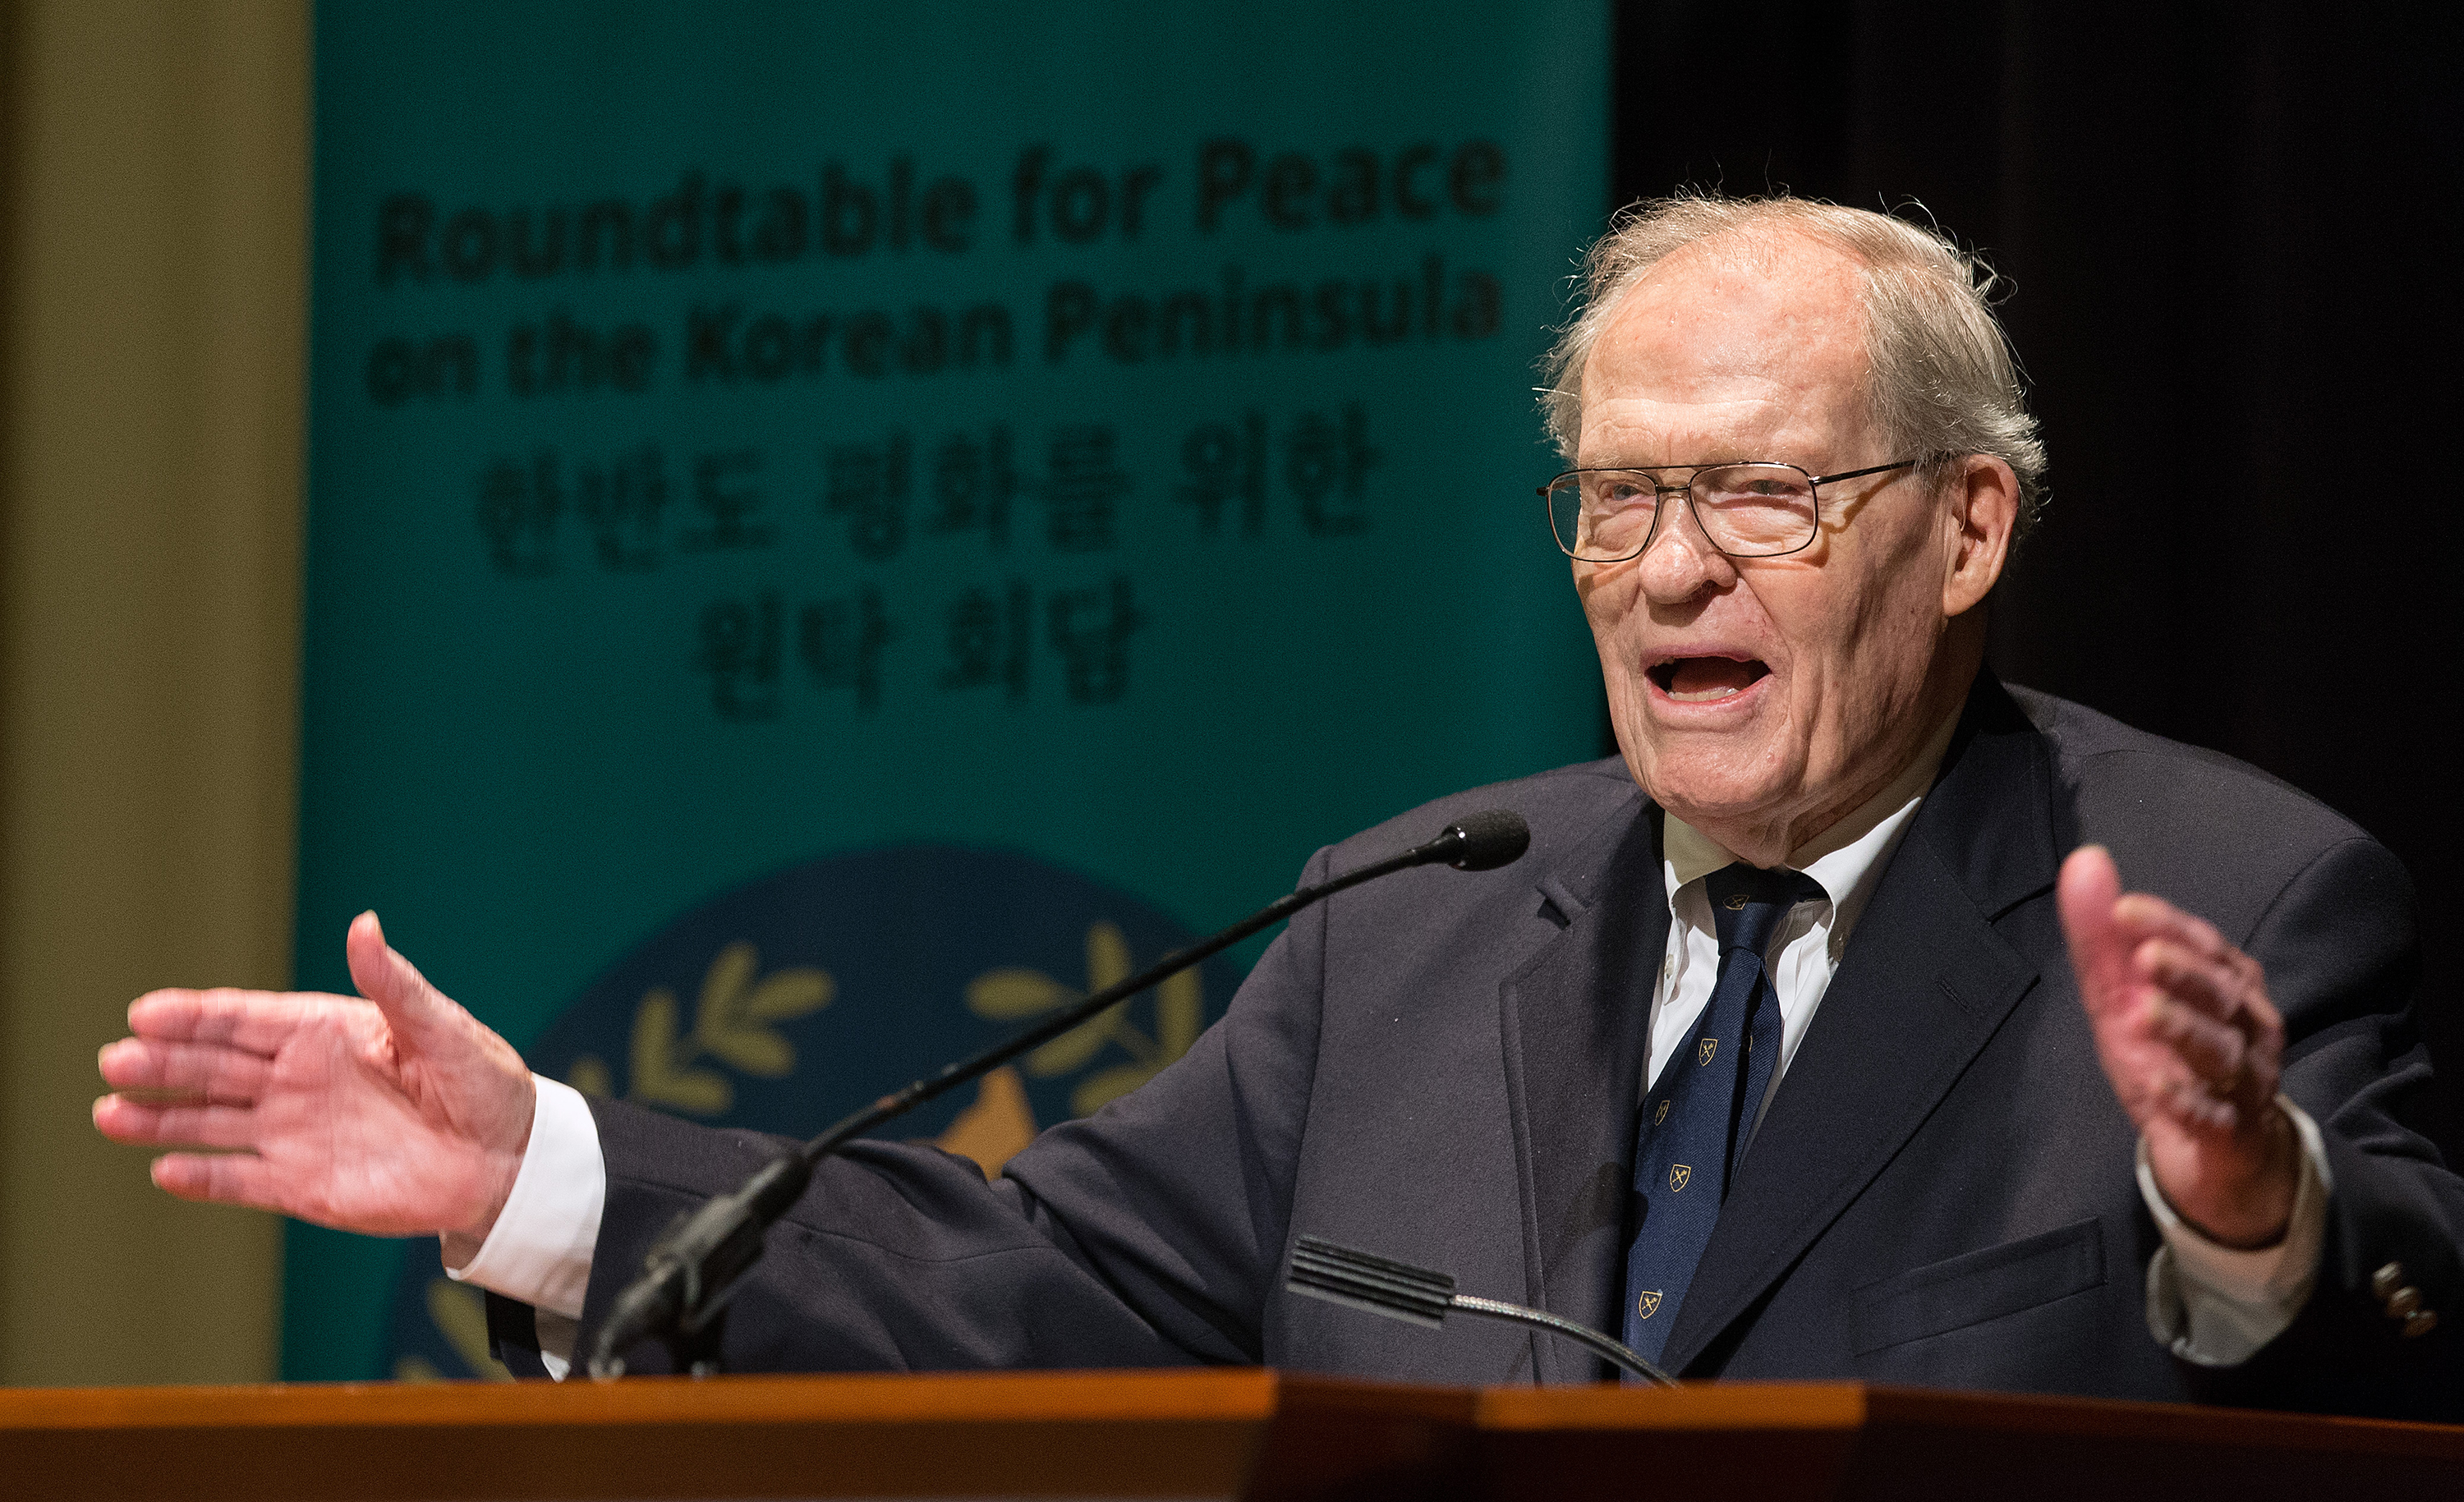 The Rev. James T. Laney speaks during the Roundtable for Peace on the Korean Peninsula in Atlanta. Laney is former U.S. Ambassador to South Korea and former dean of the Candler School of Theology. Photo by Mike DuBose, UMNS.